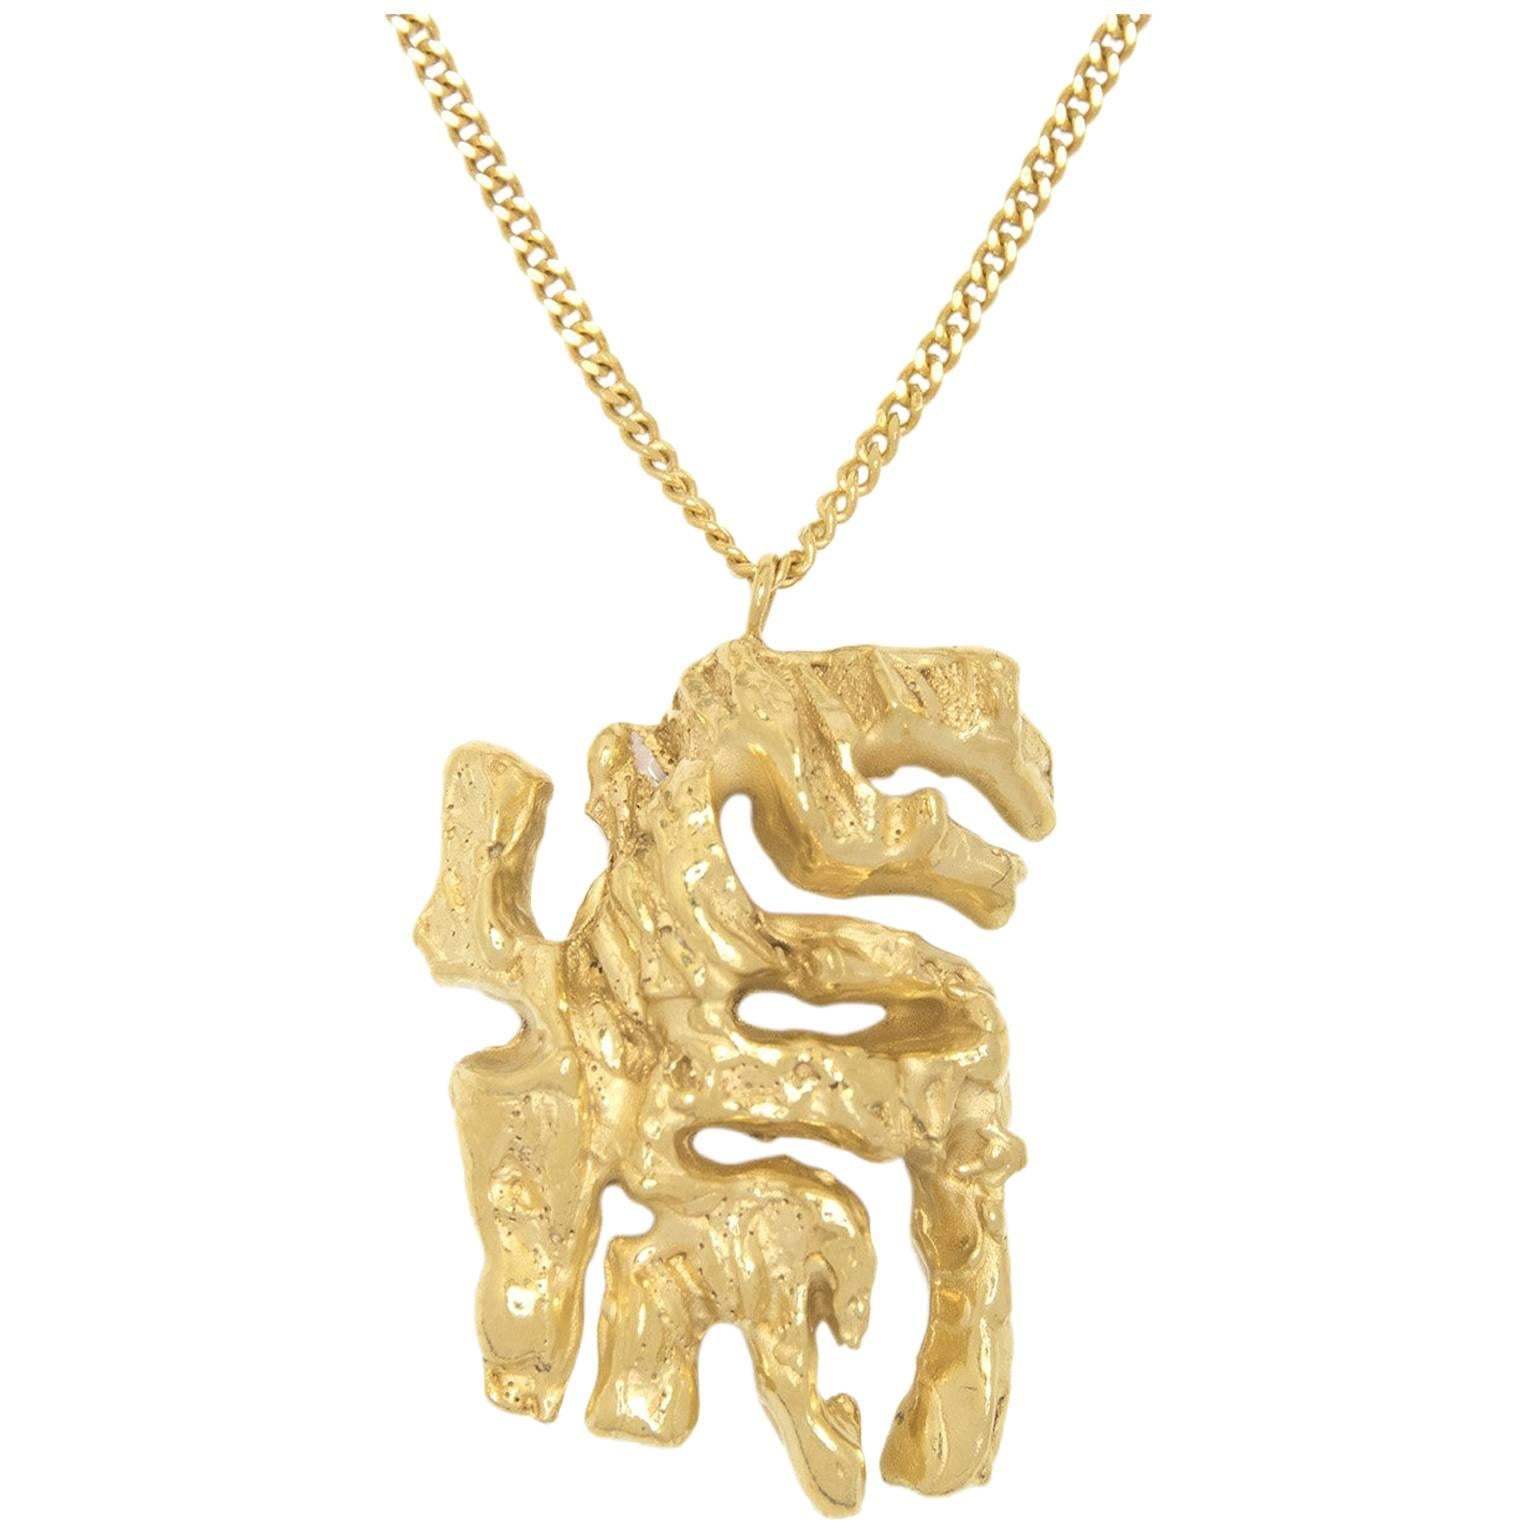 Loveness Lee - Chinese Zodiac Tiger - Horoscope Gold Pendant Necklace For Sale